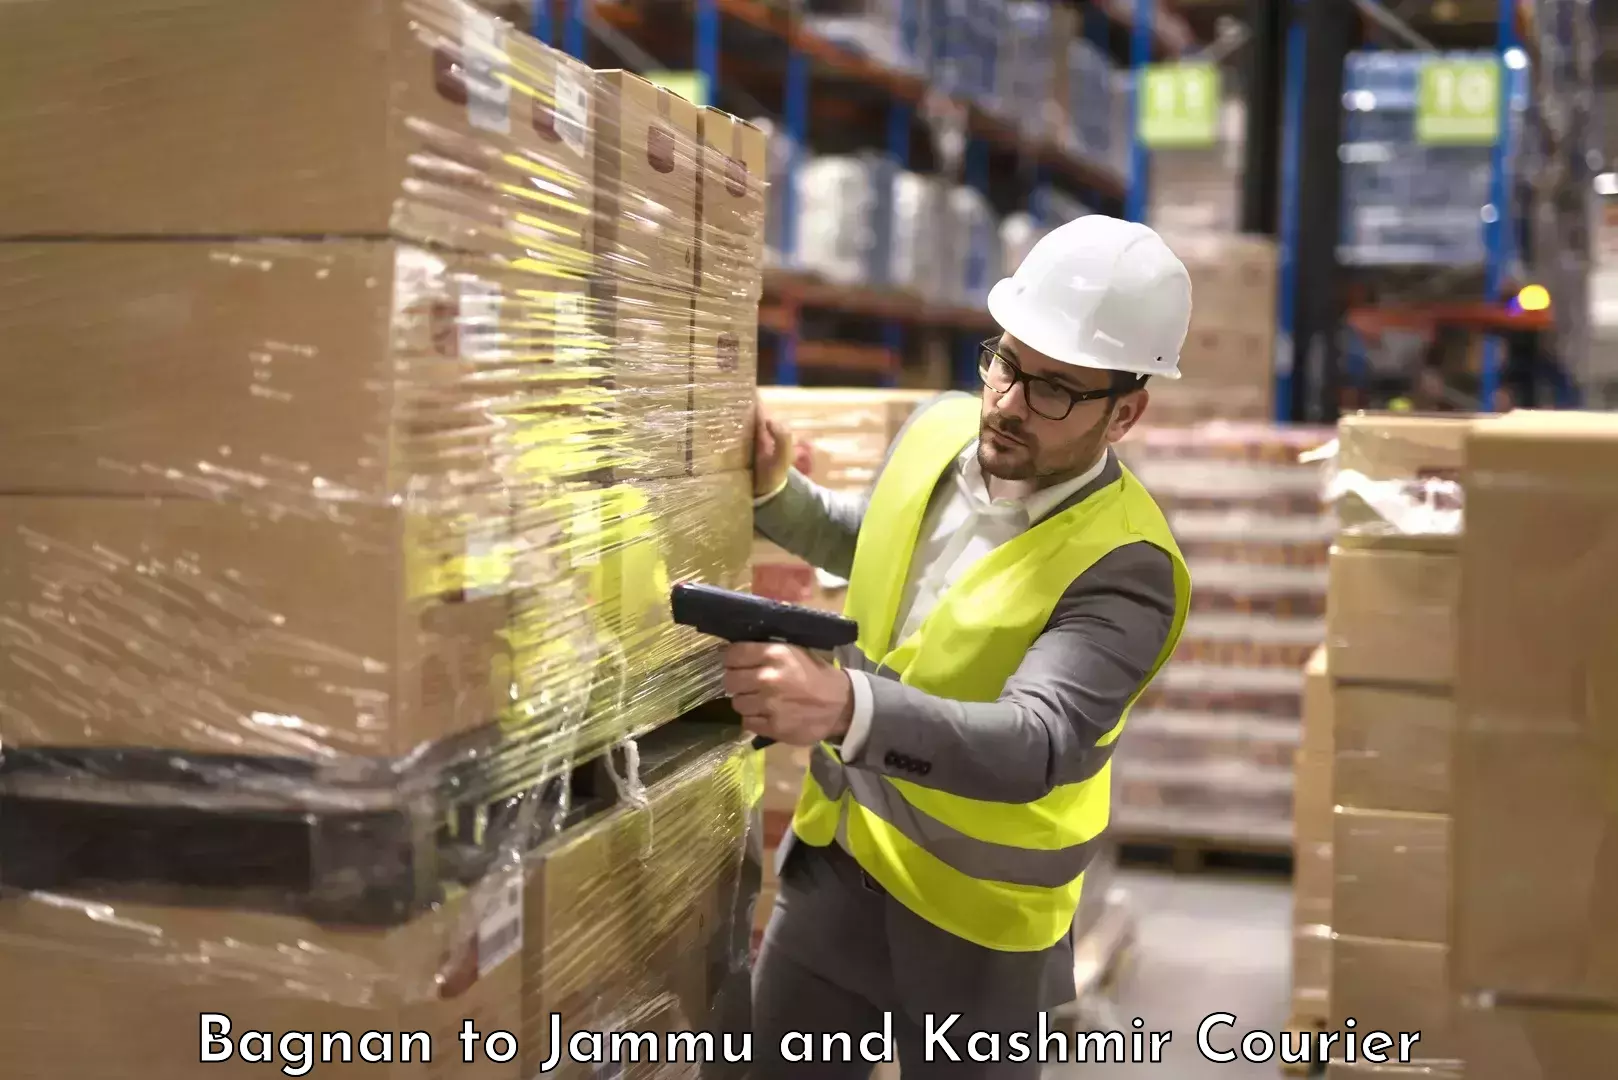 Luggage transport consultancy Bagnan to Jammu and Kashmir